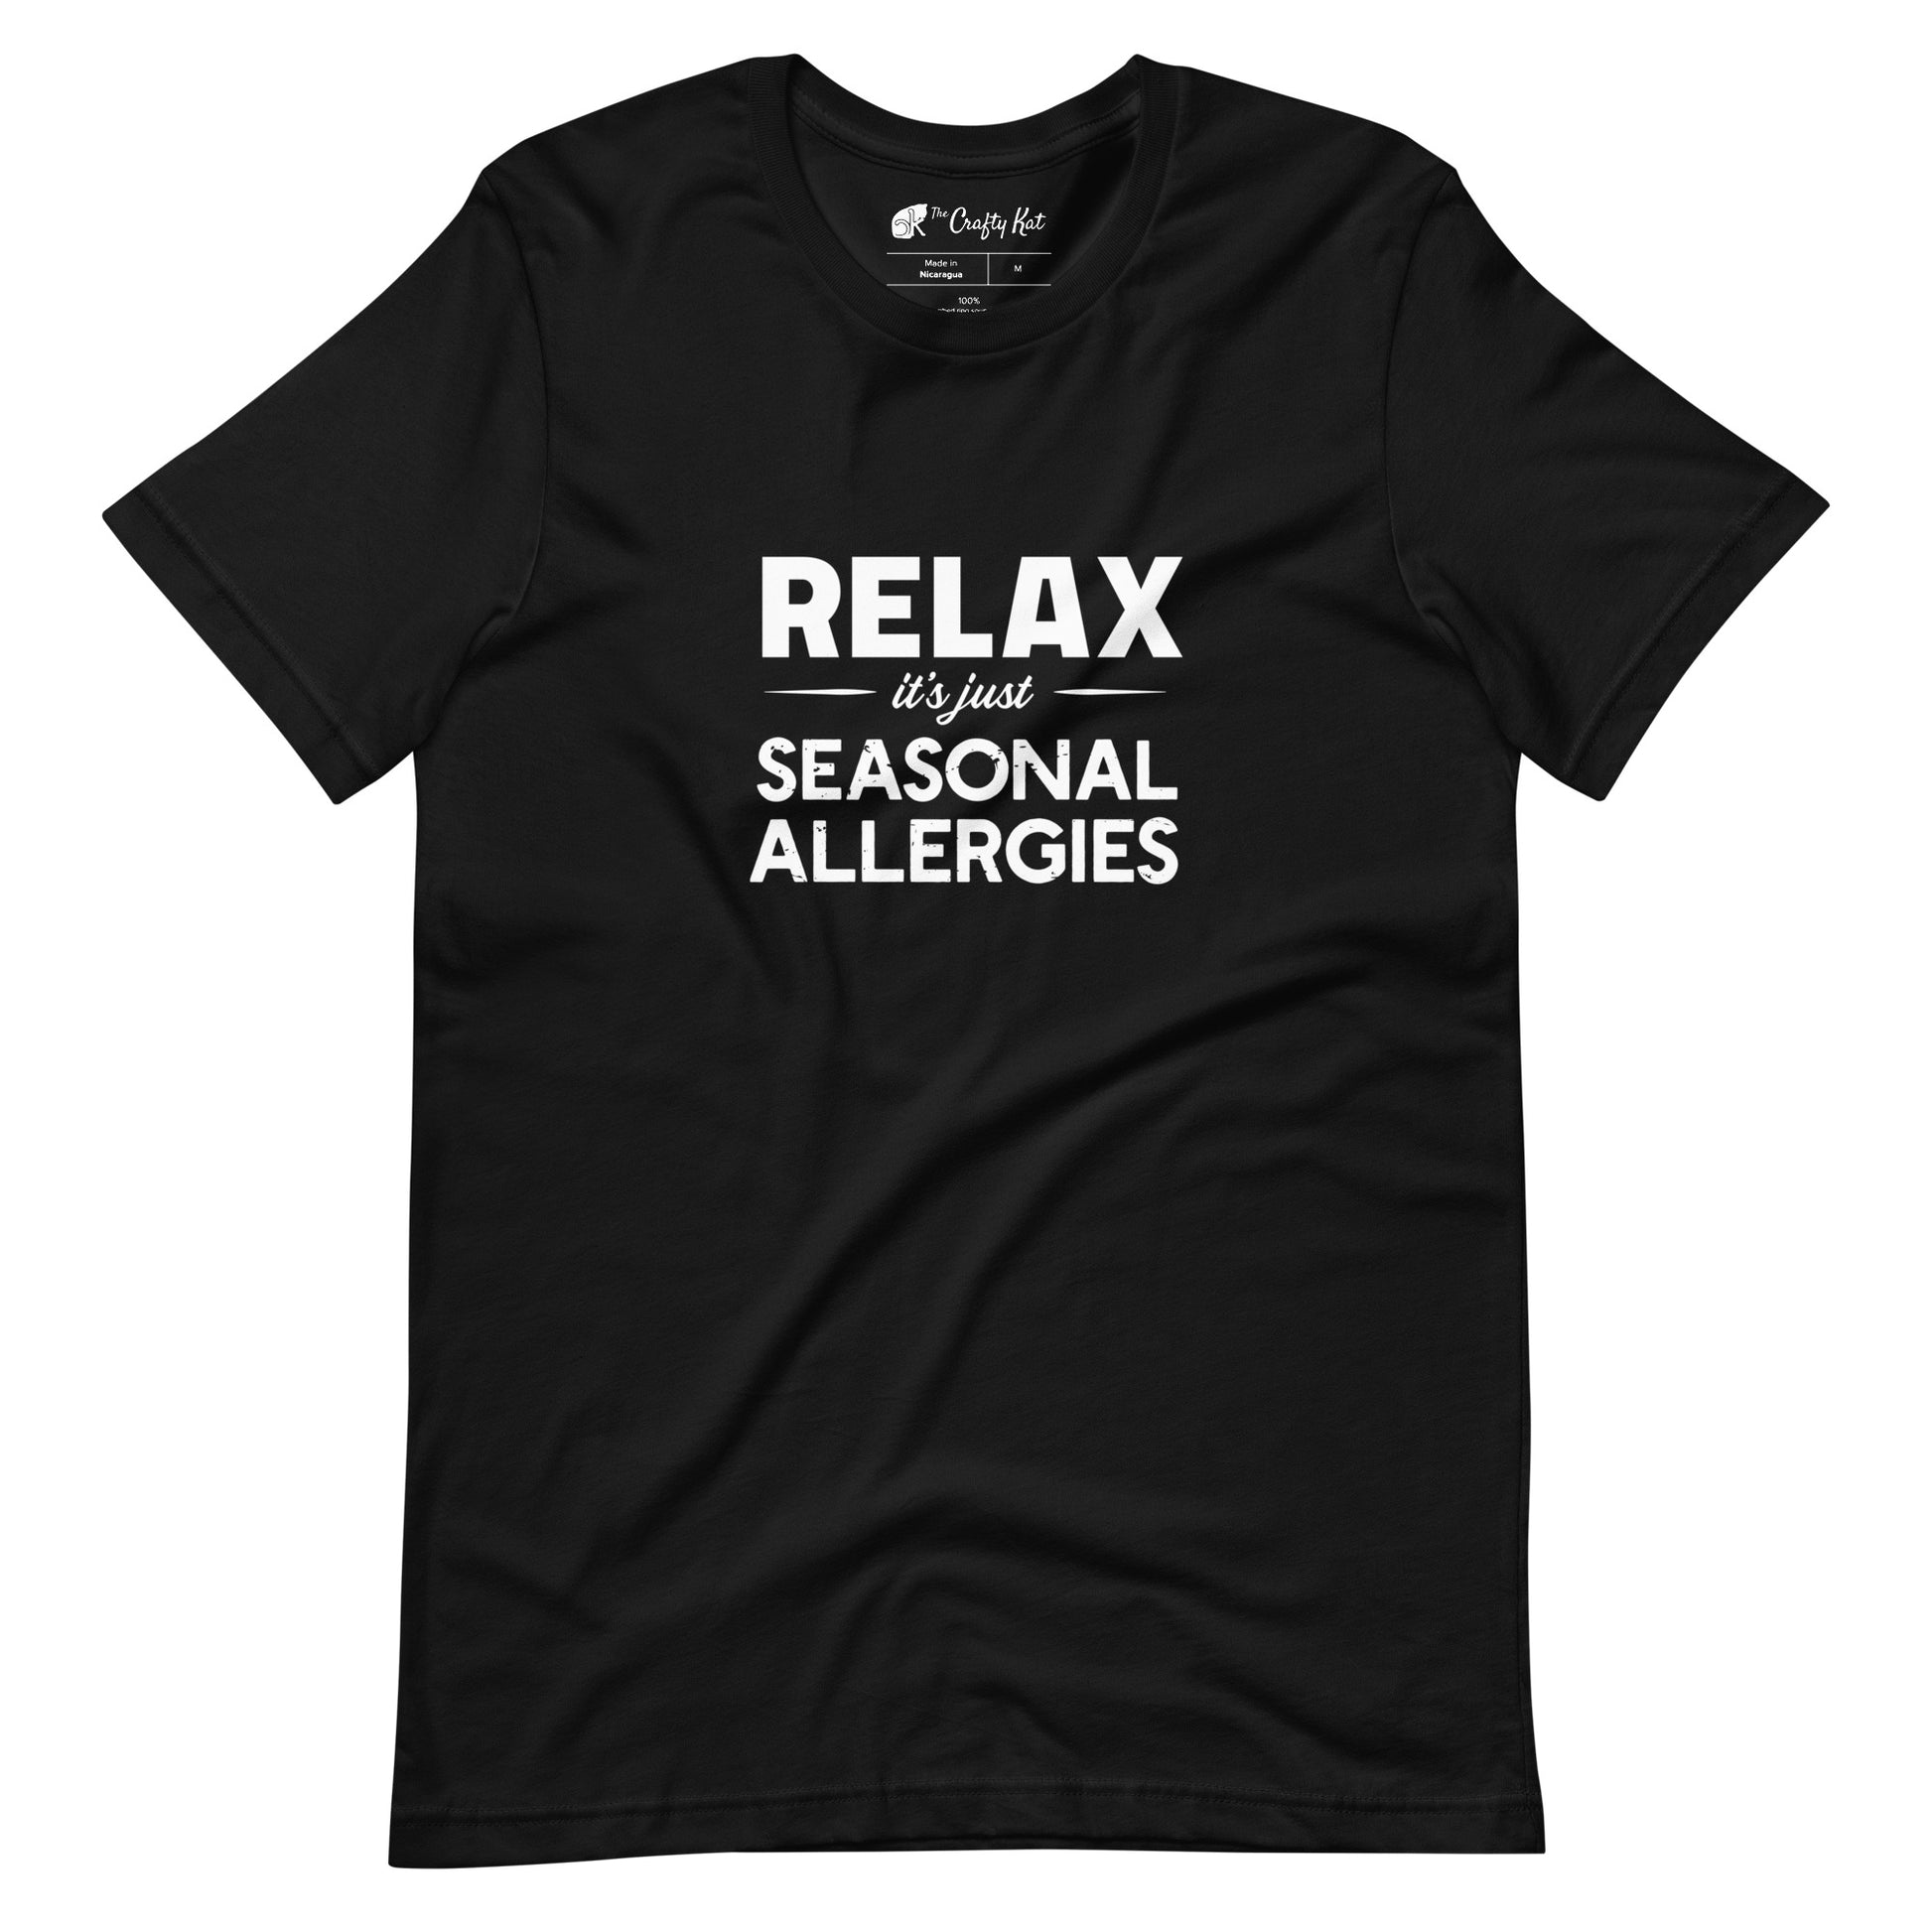 Black t-shirt with white graphic: "RELAX it's just SEASONAL ALLERGIES"